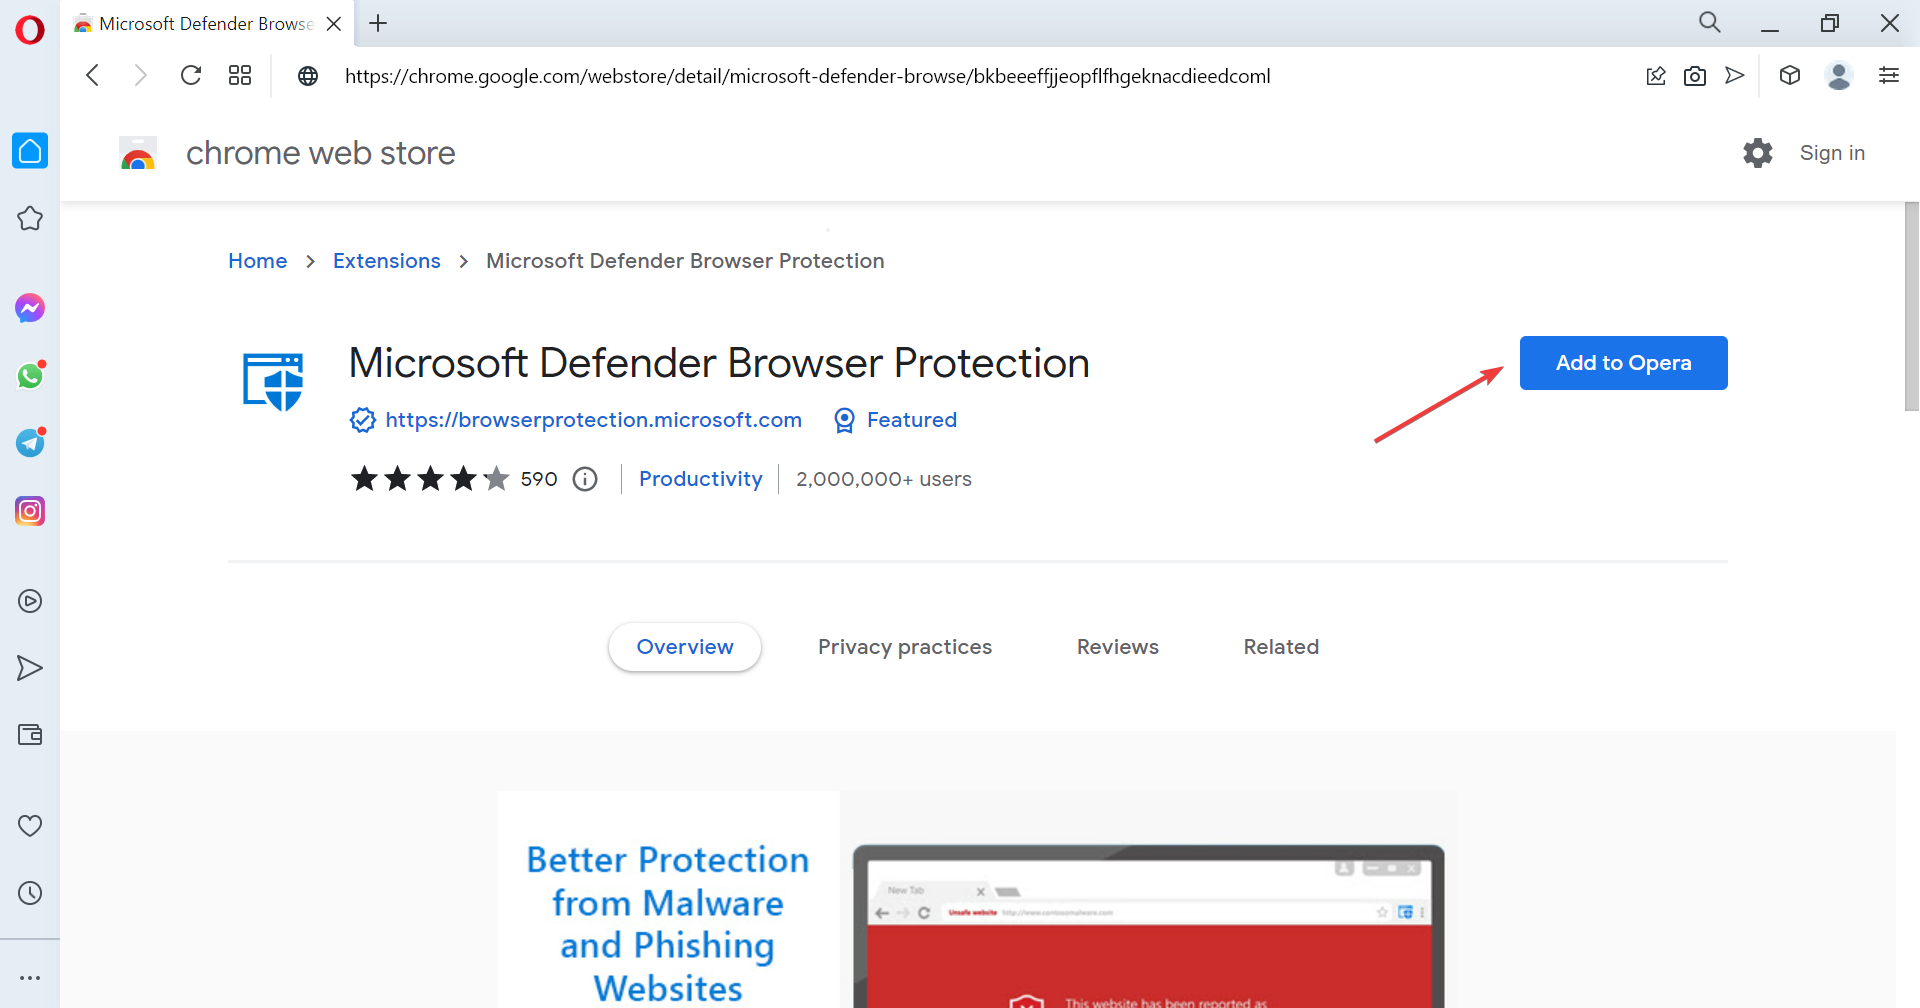 add to opera to get windows defender browser protection